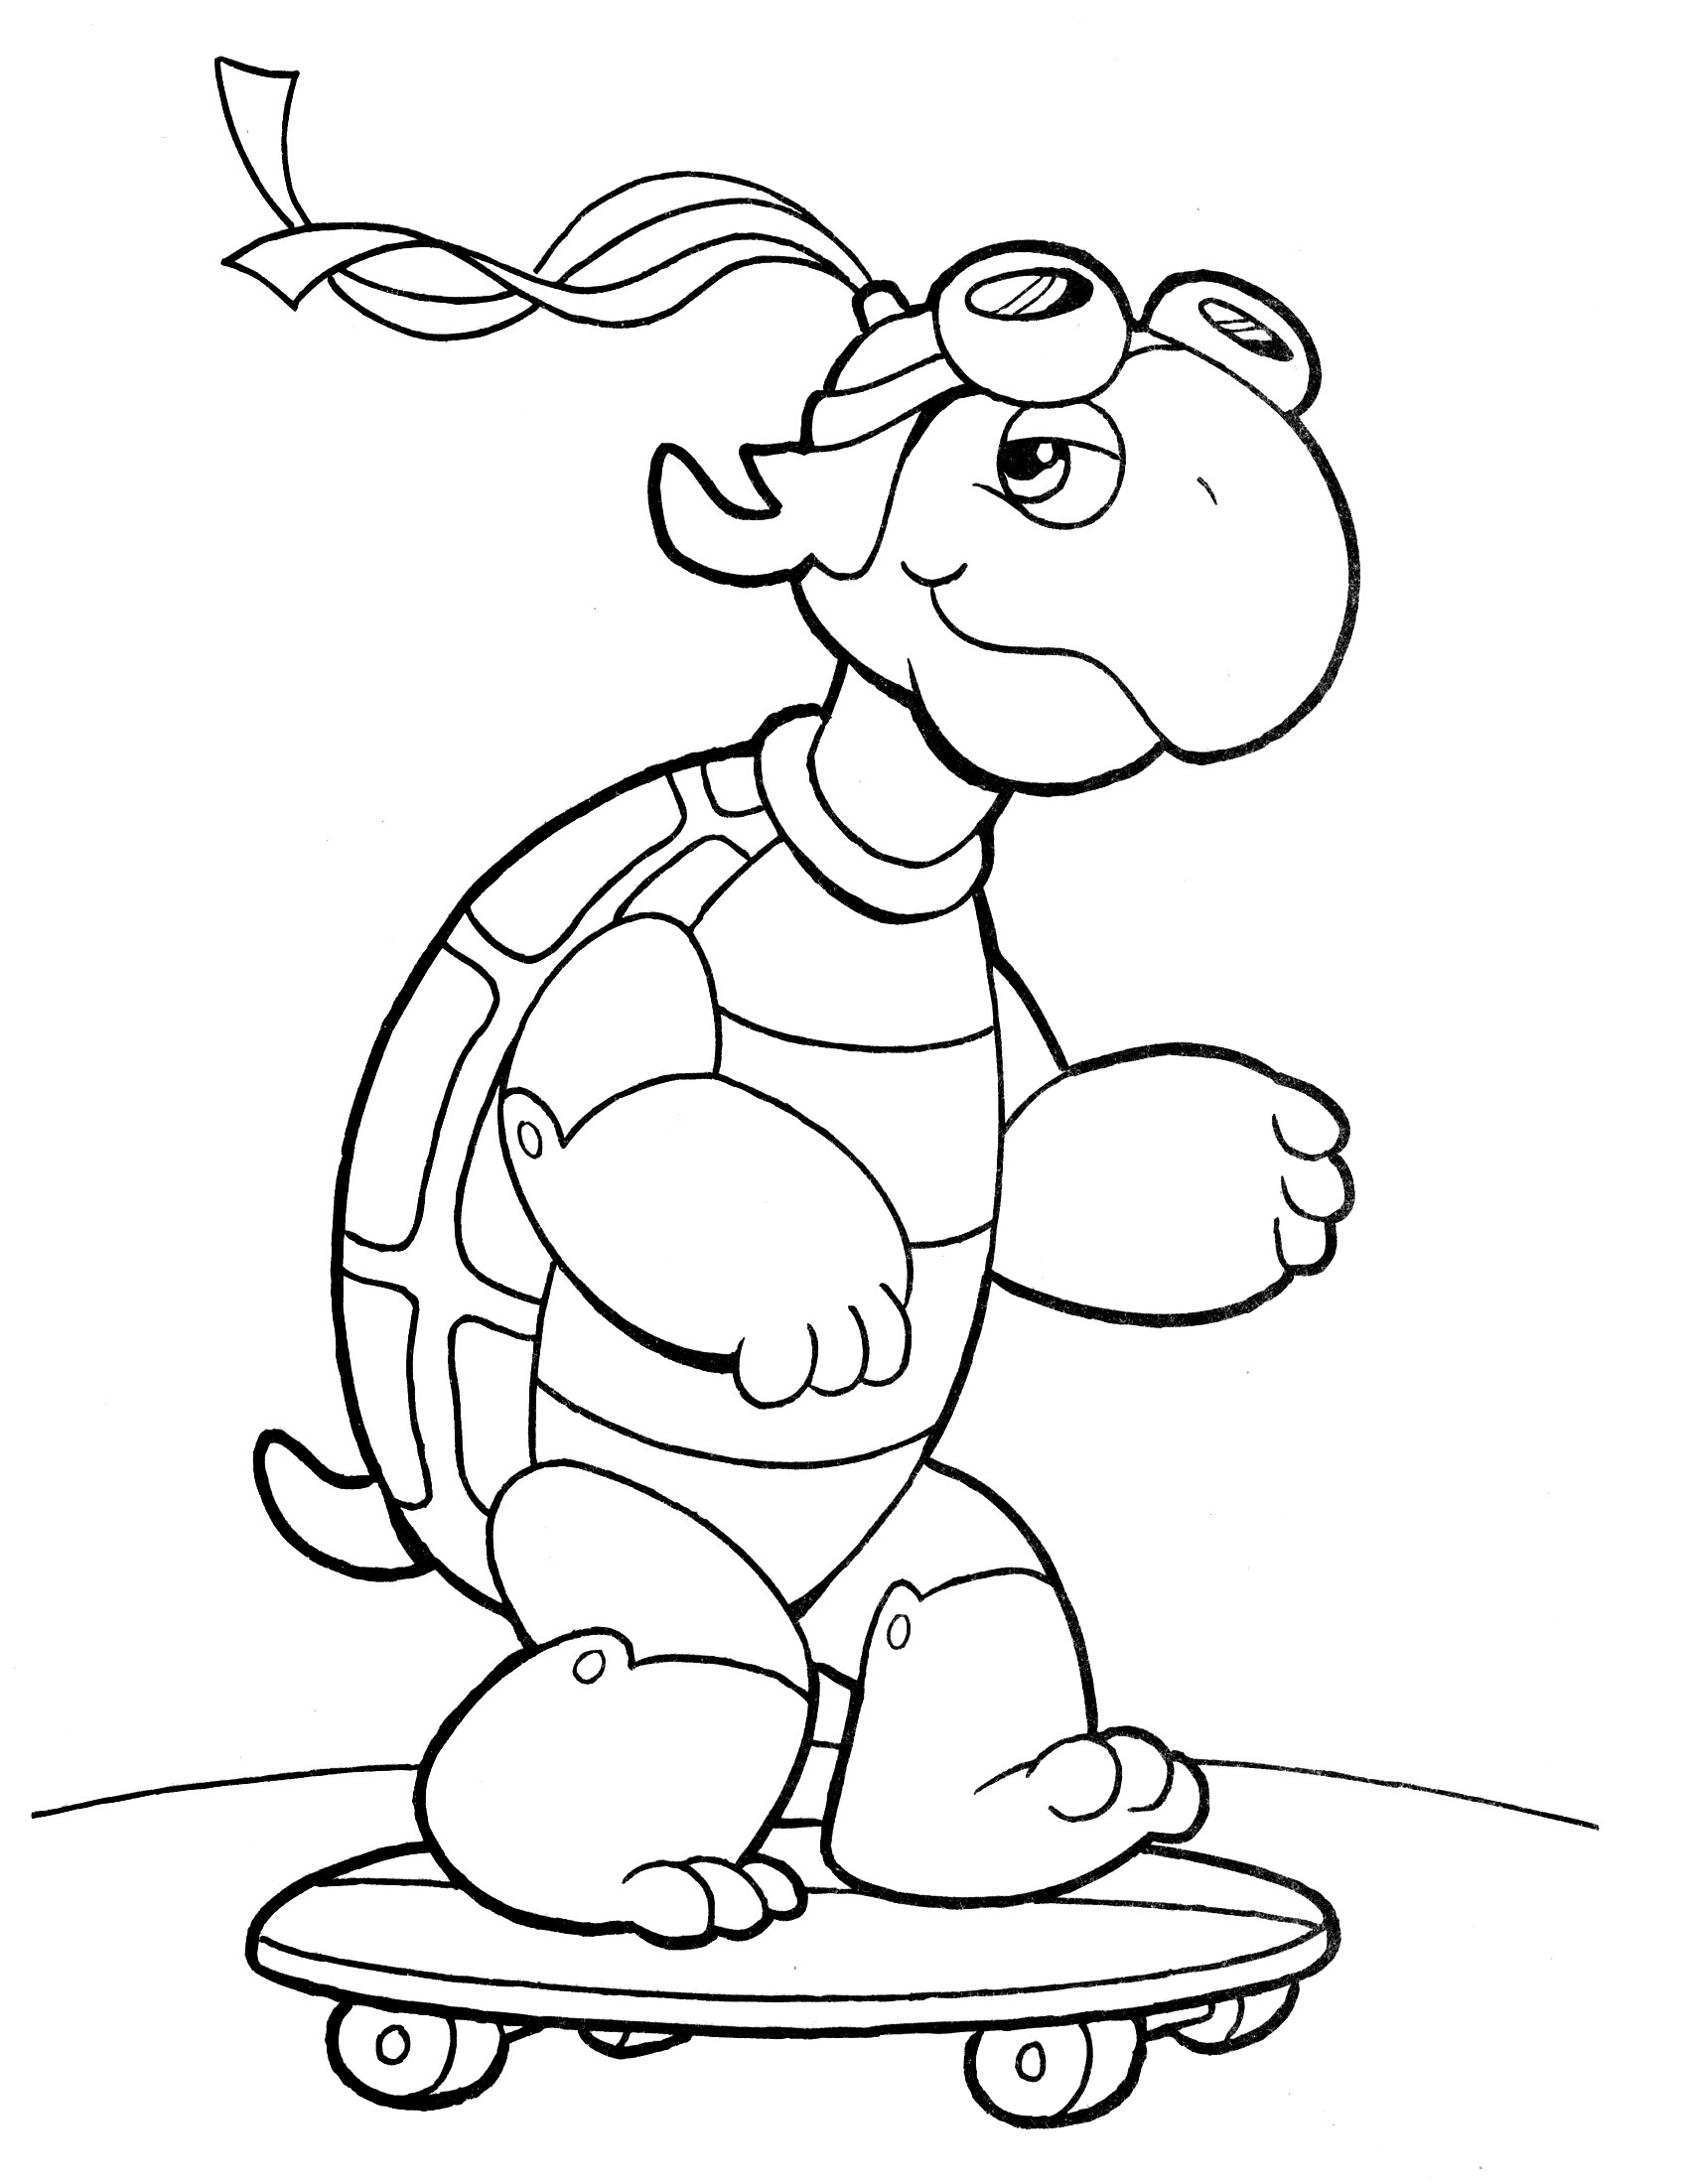 Crayola Summer Coloring Pages at GetColorings.com | Free printable colorings pages to print and